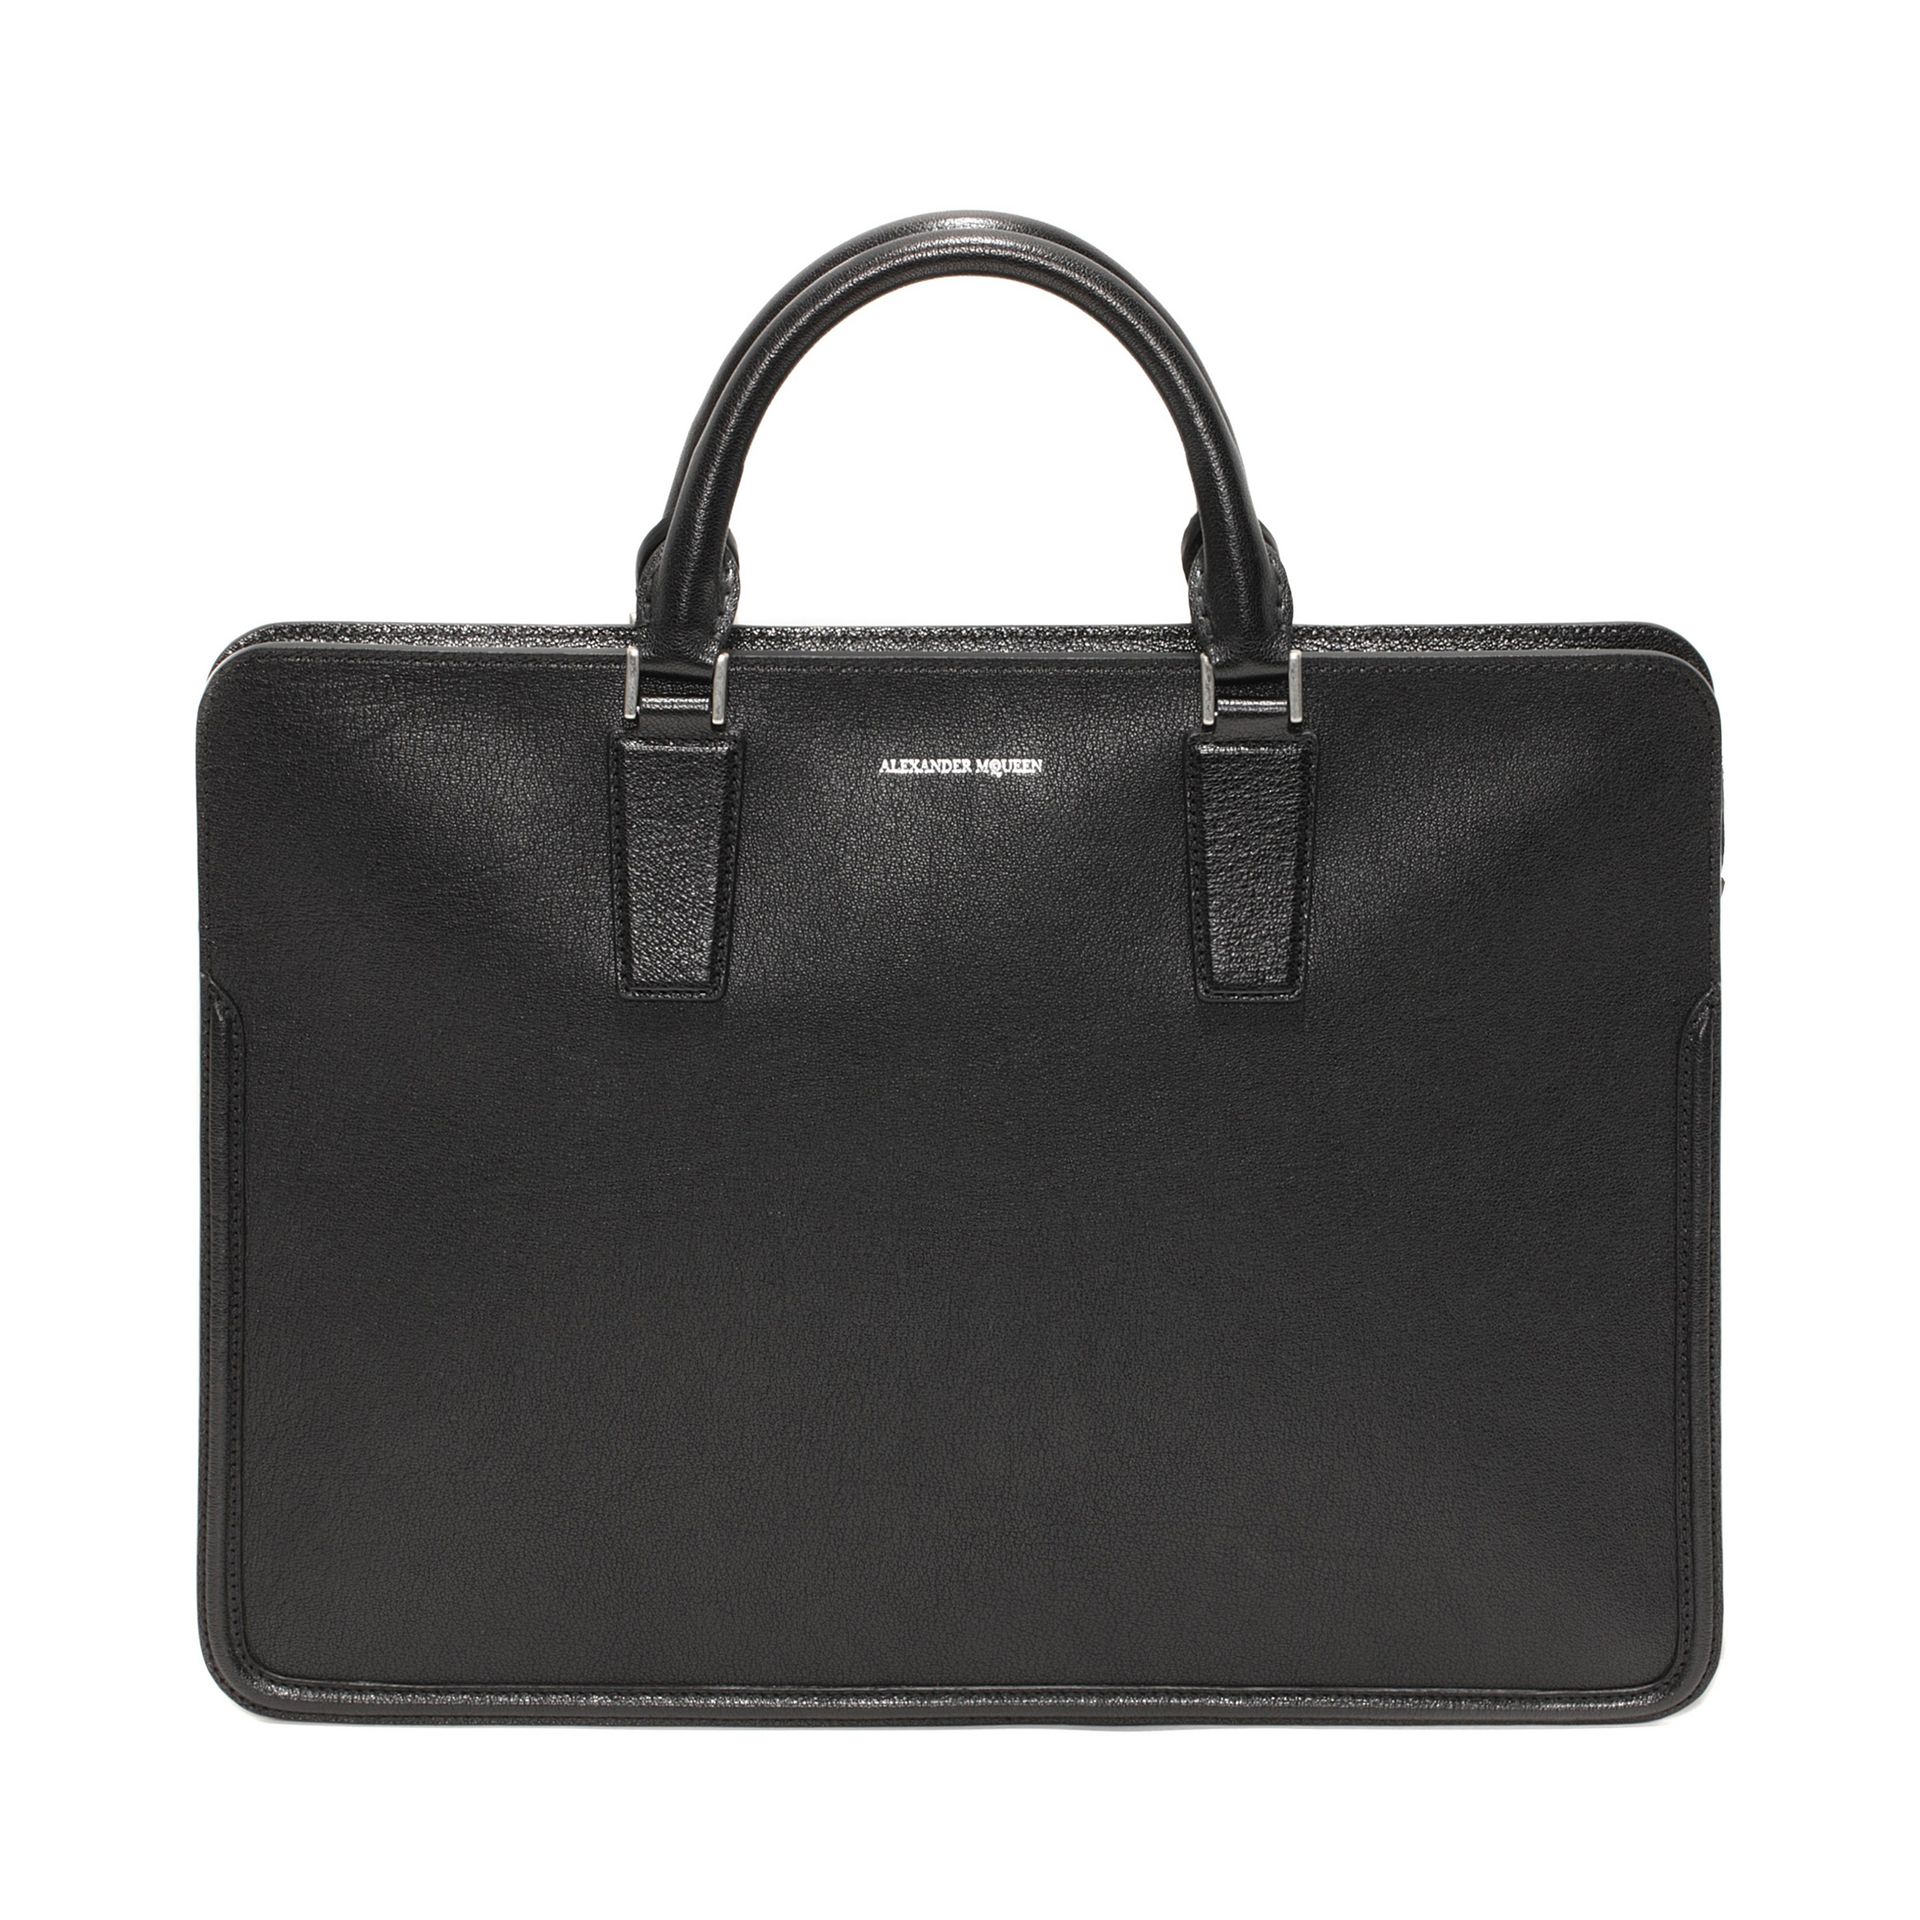 Heroic Briefcase Alexander McQueen | Bag | Bags And Leather Goods